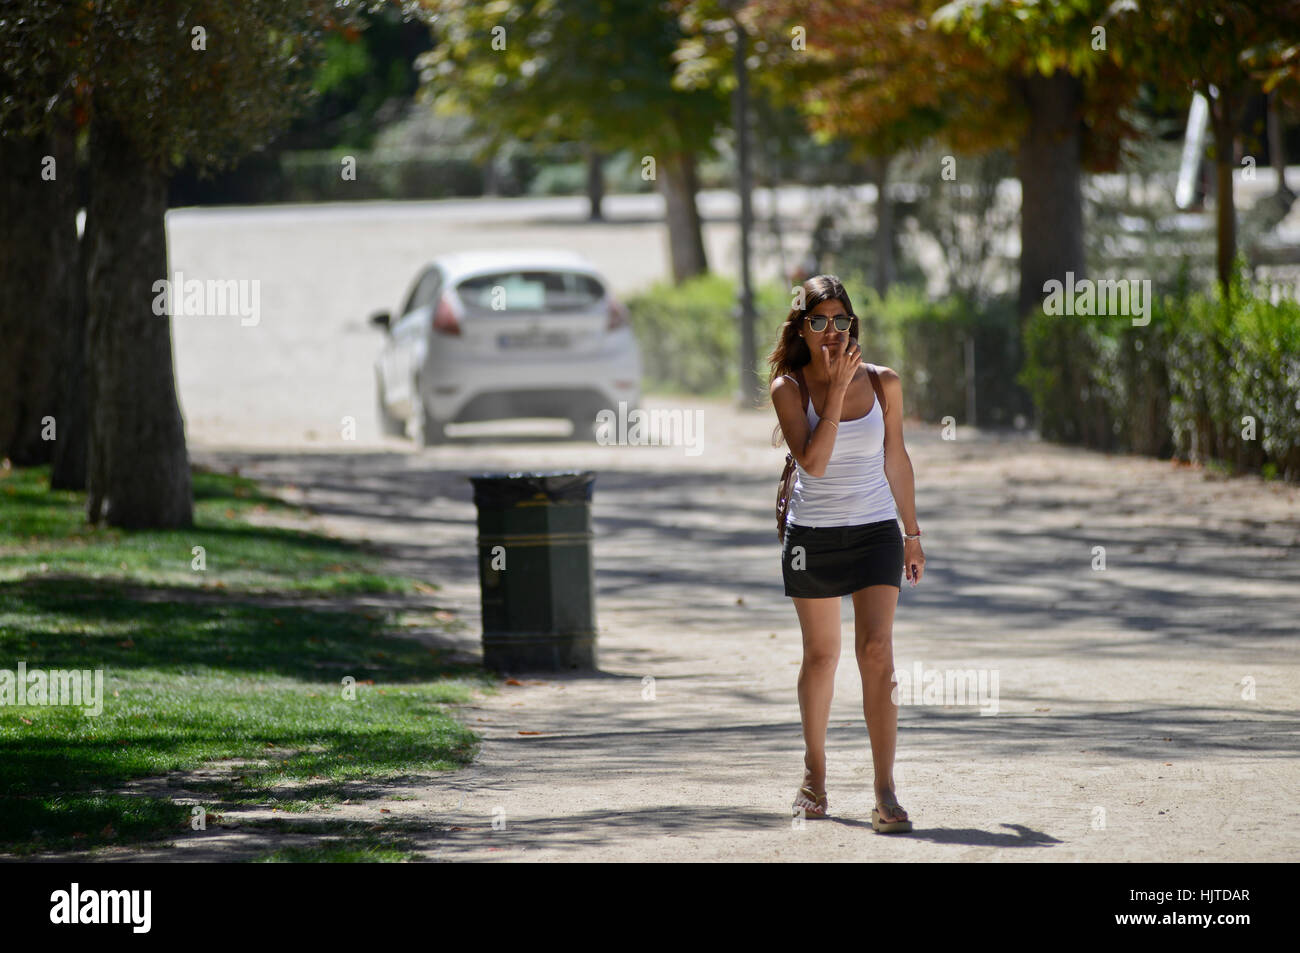 Brunette woman in mini skirt walking down the street, with a car on the background Stock Photo